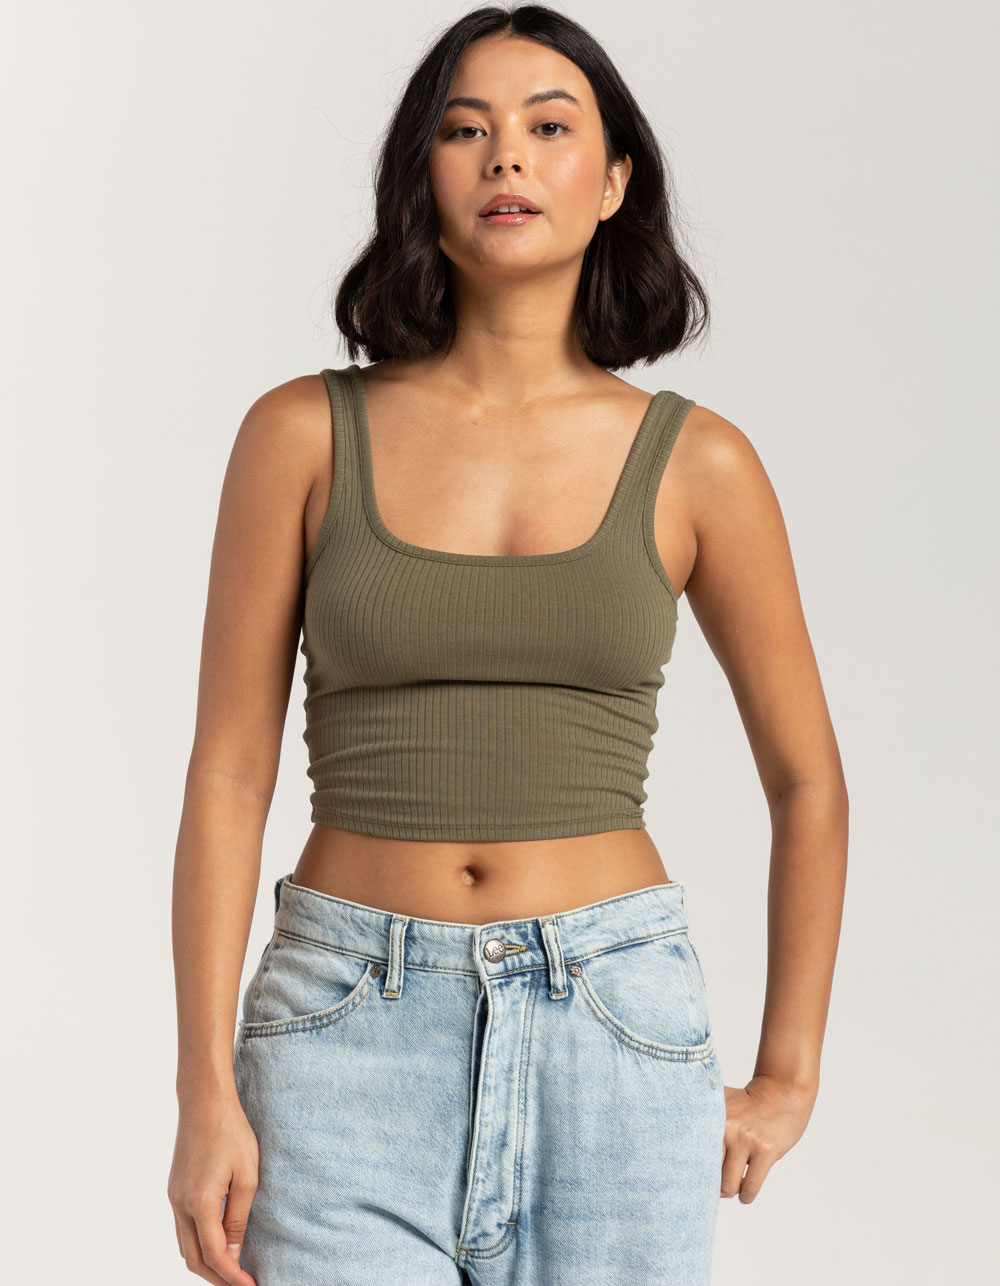 Ladies and gentlemen, Tucky. Turn literally any top into a crop top this  summer! No 🍈🍈 tuck or ✂️ required. #stylehack #croptopdiy